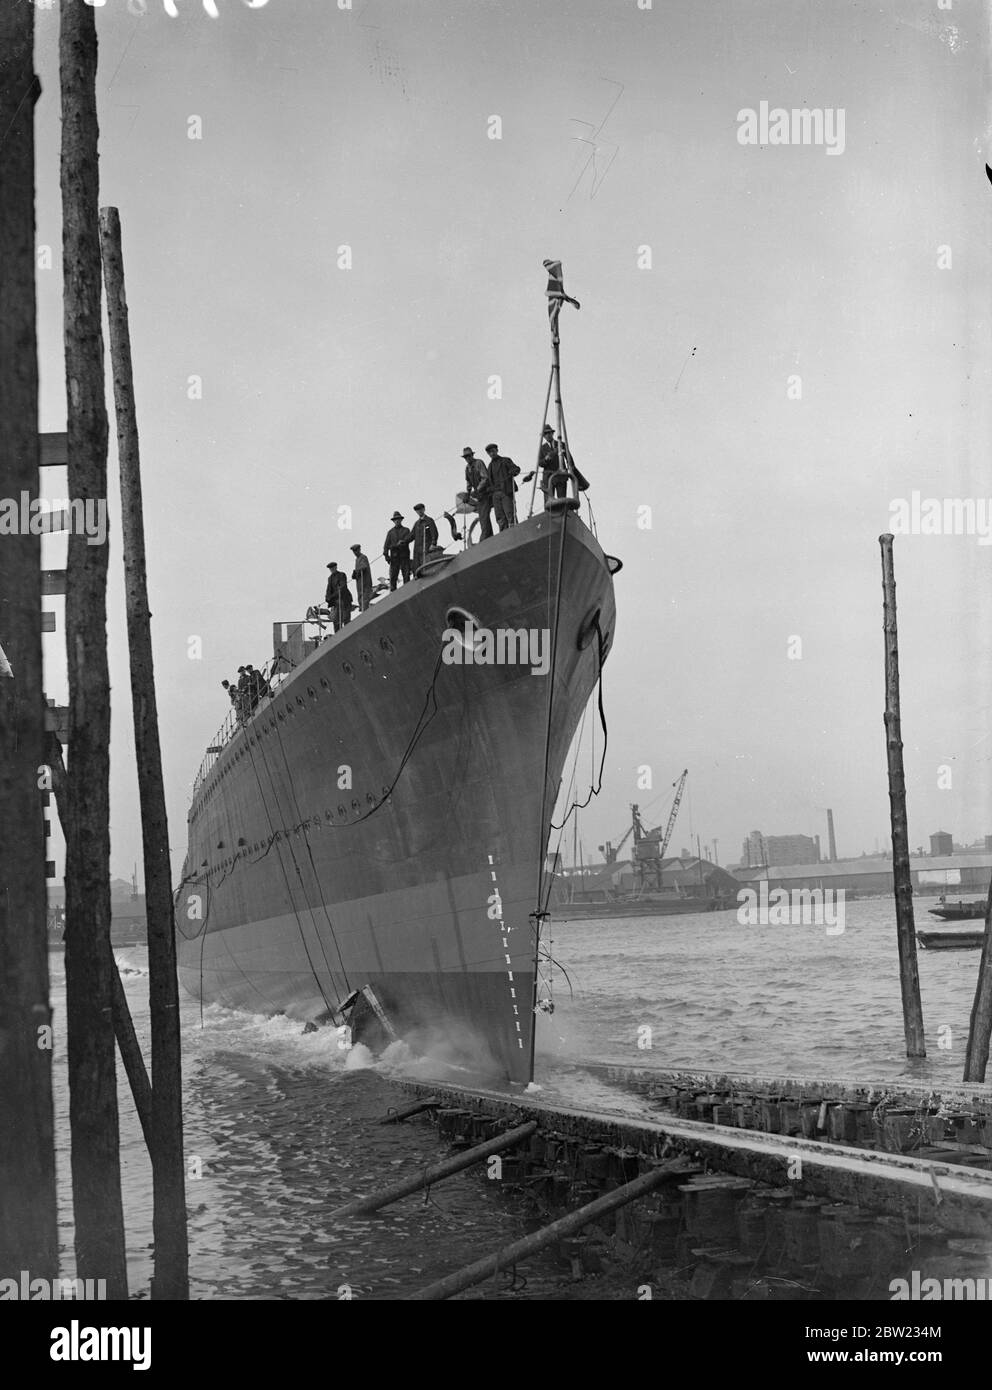 mohawk  taking the water at her launch. With an armaments of 84.7 inch guns double that of earlier destroyers the mohawk latest of the large tribe last destroyers was launched. It displaces 1850 t and 44,000 hp turbine engines which will give her a design speed of 36 knots. 5 October 1937. Stock Photo